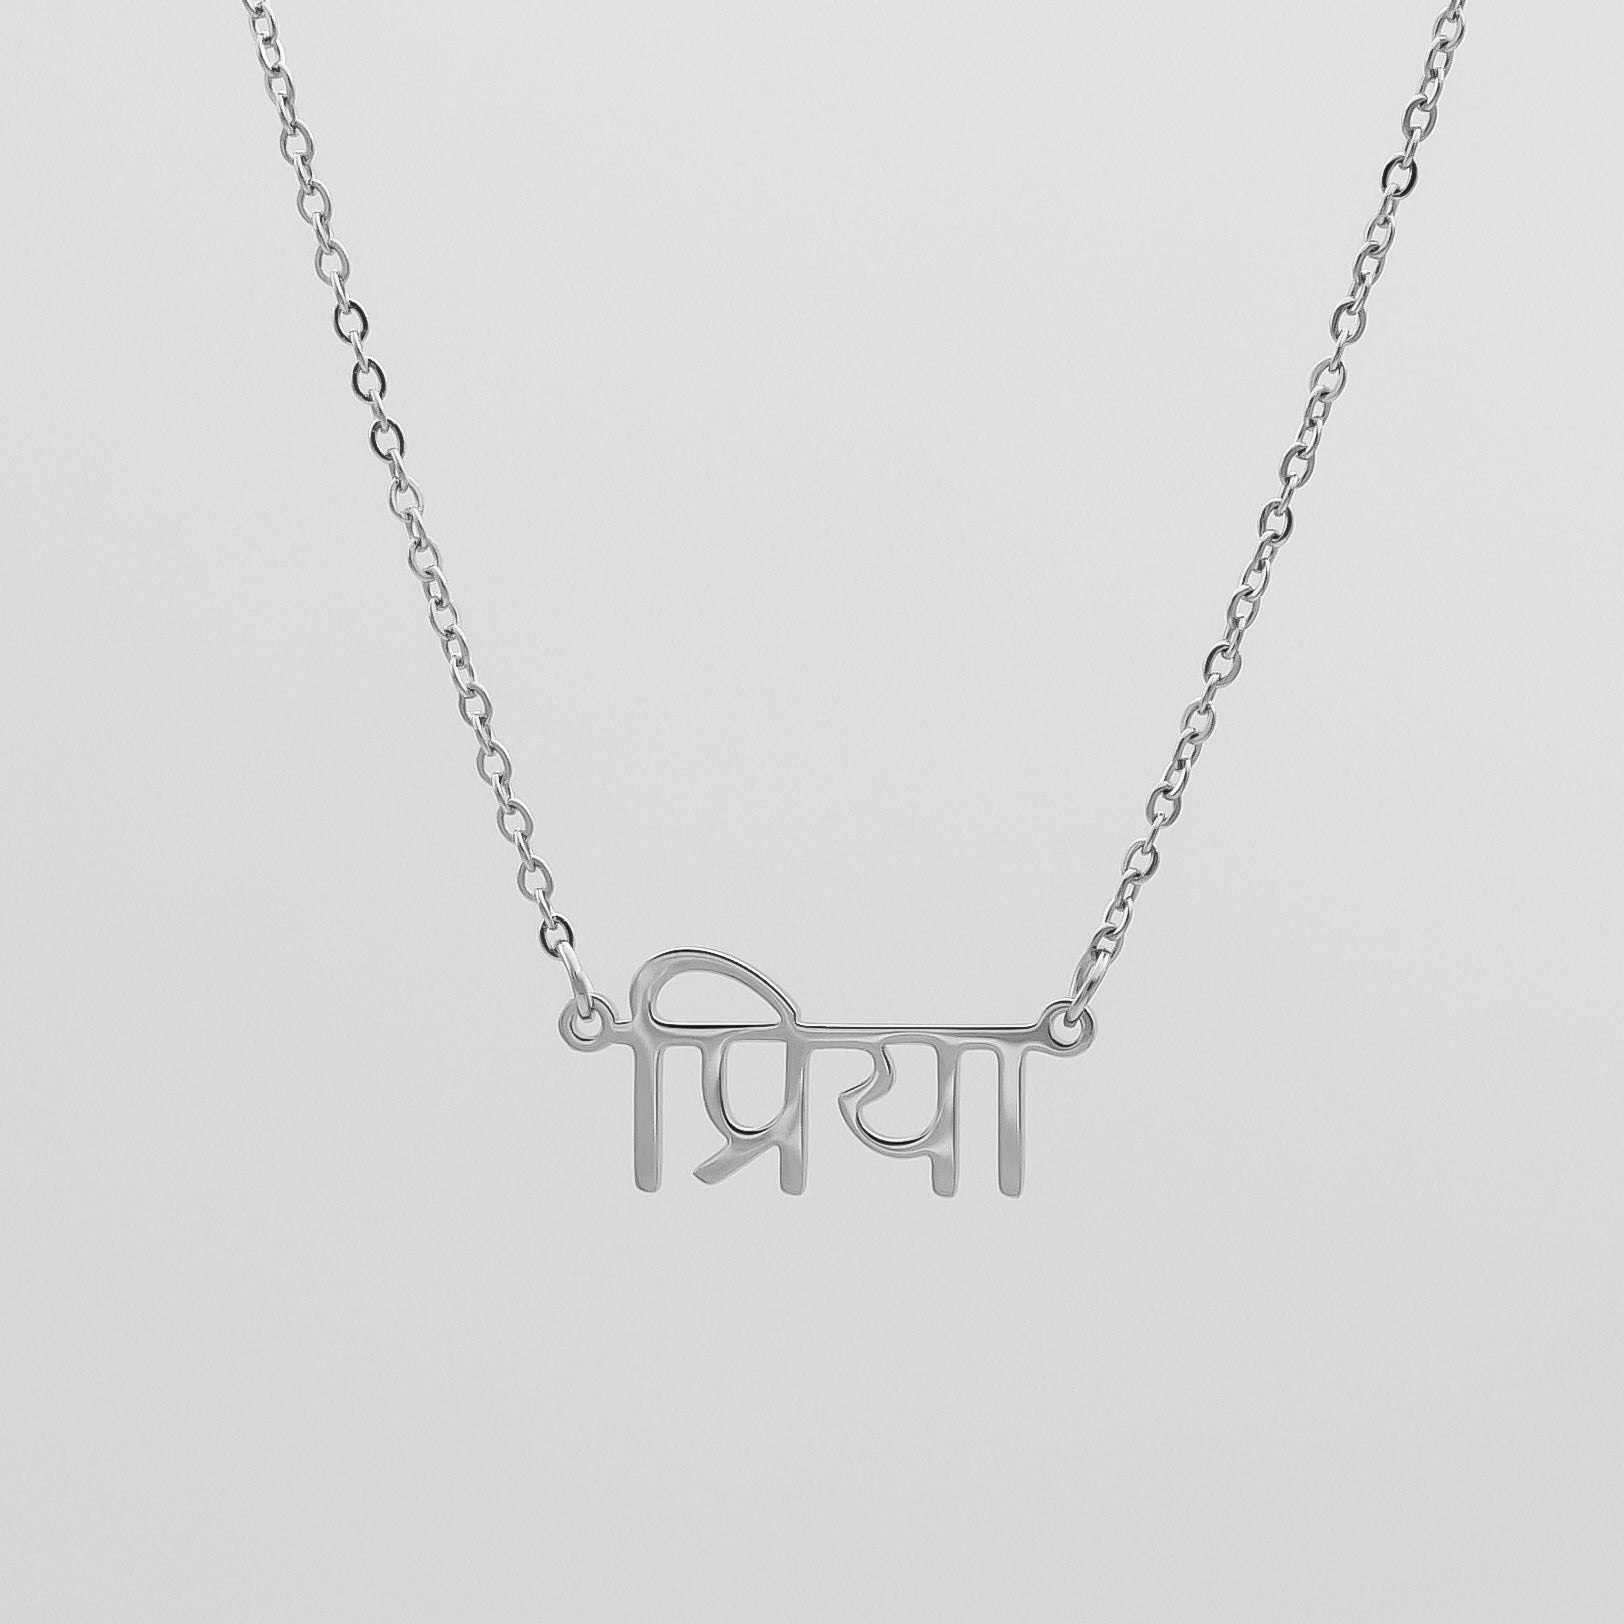 Silver Hindi name necklace on a classic link chain